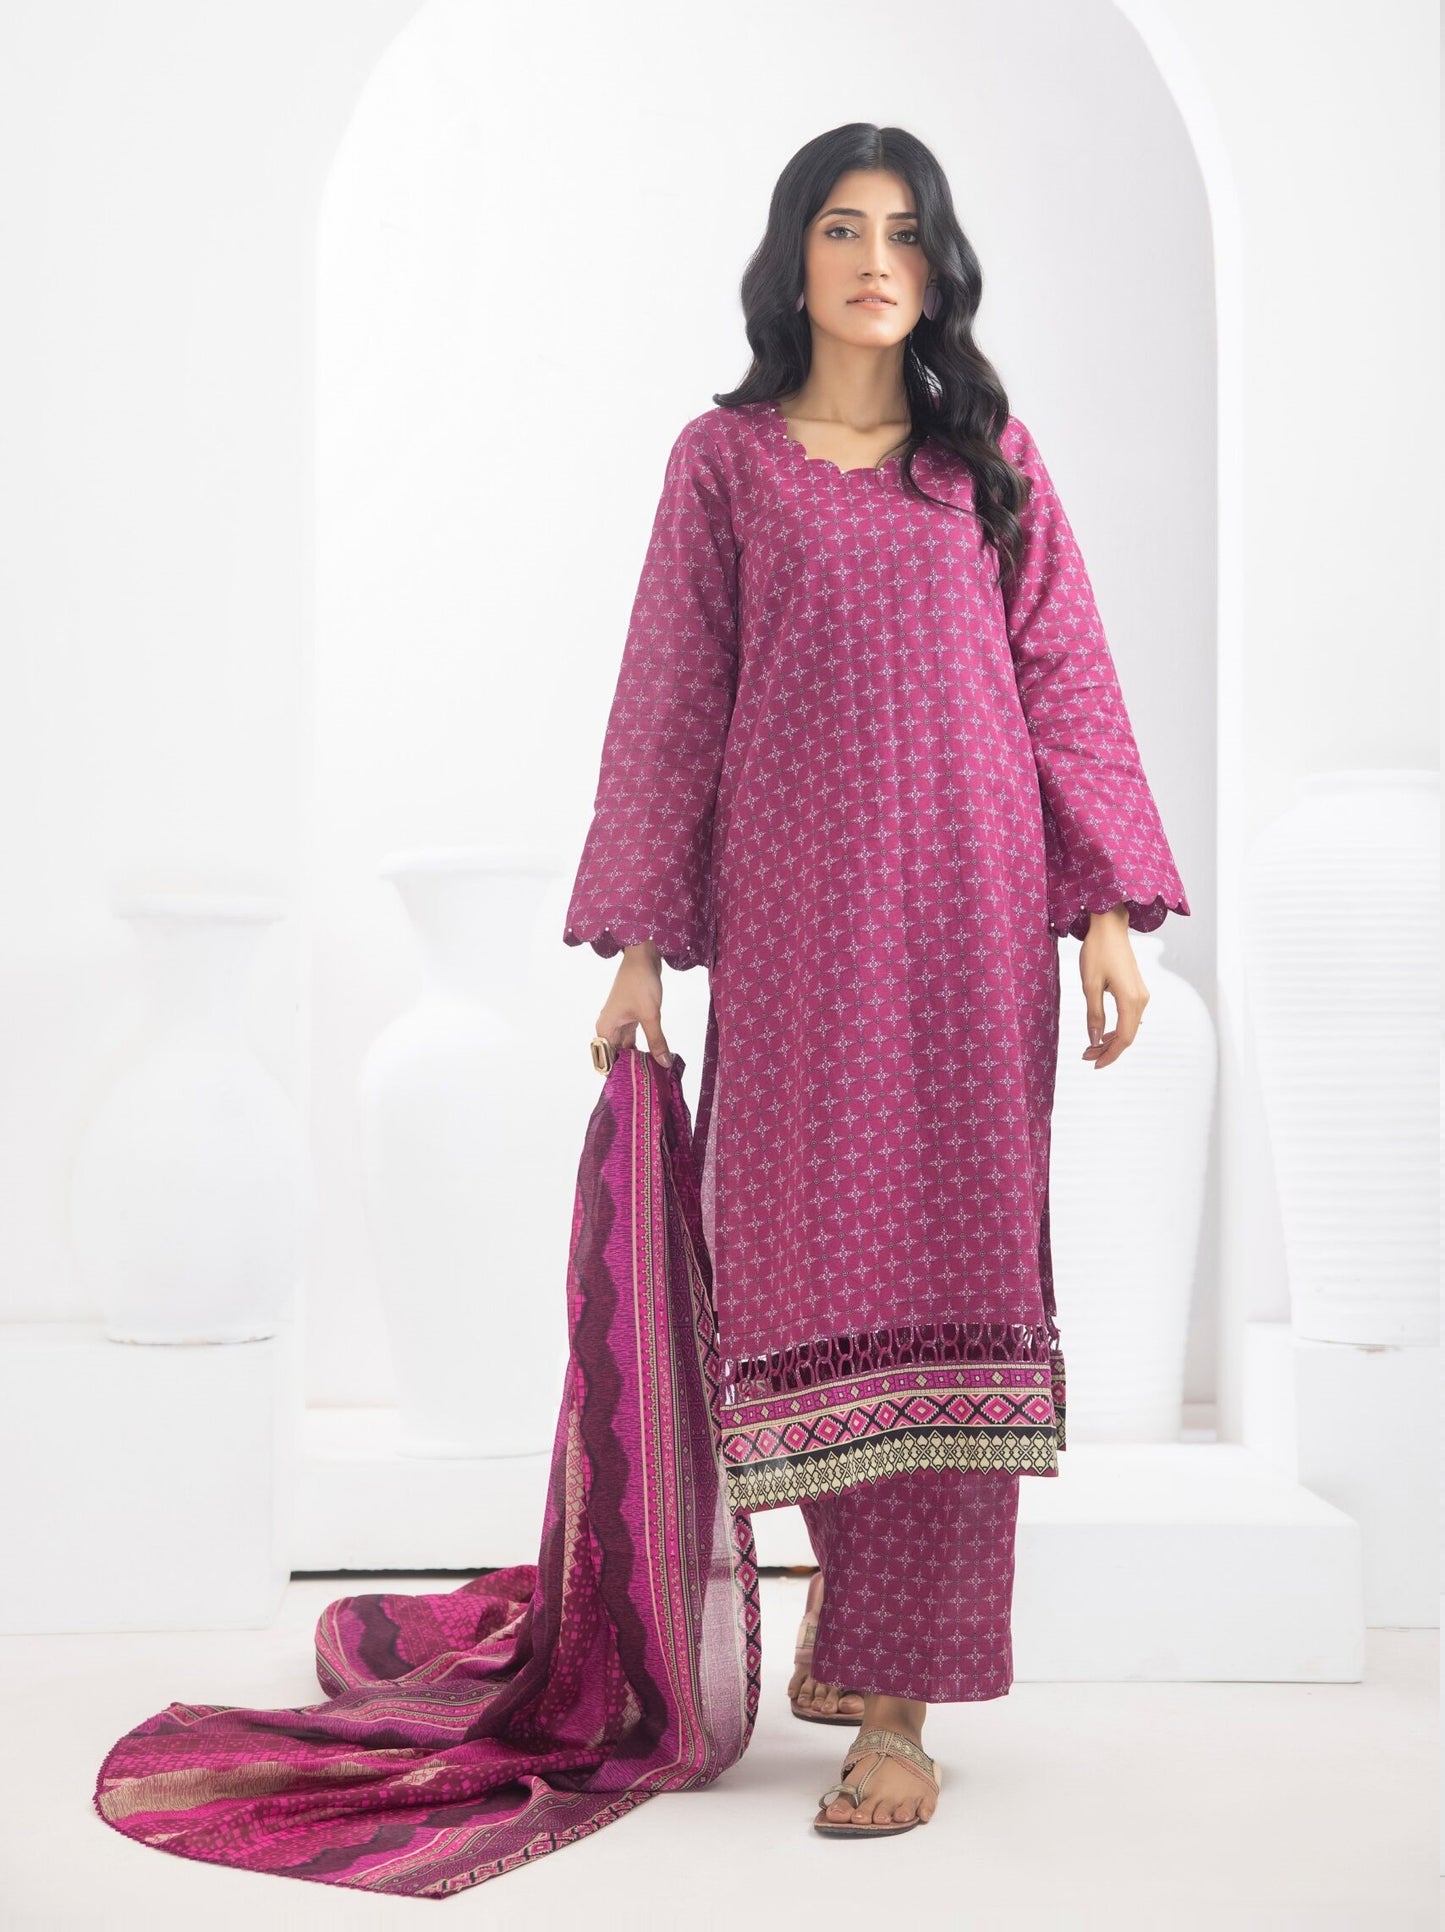 Identic Separates Printed Lawn 3 piece Unstitched dress - IDS-10-03 - Summer Collection